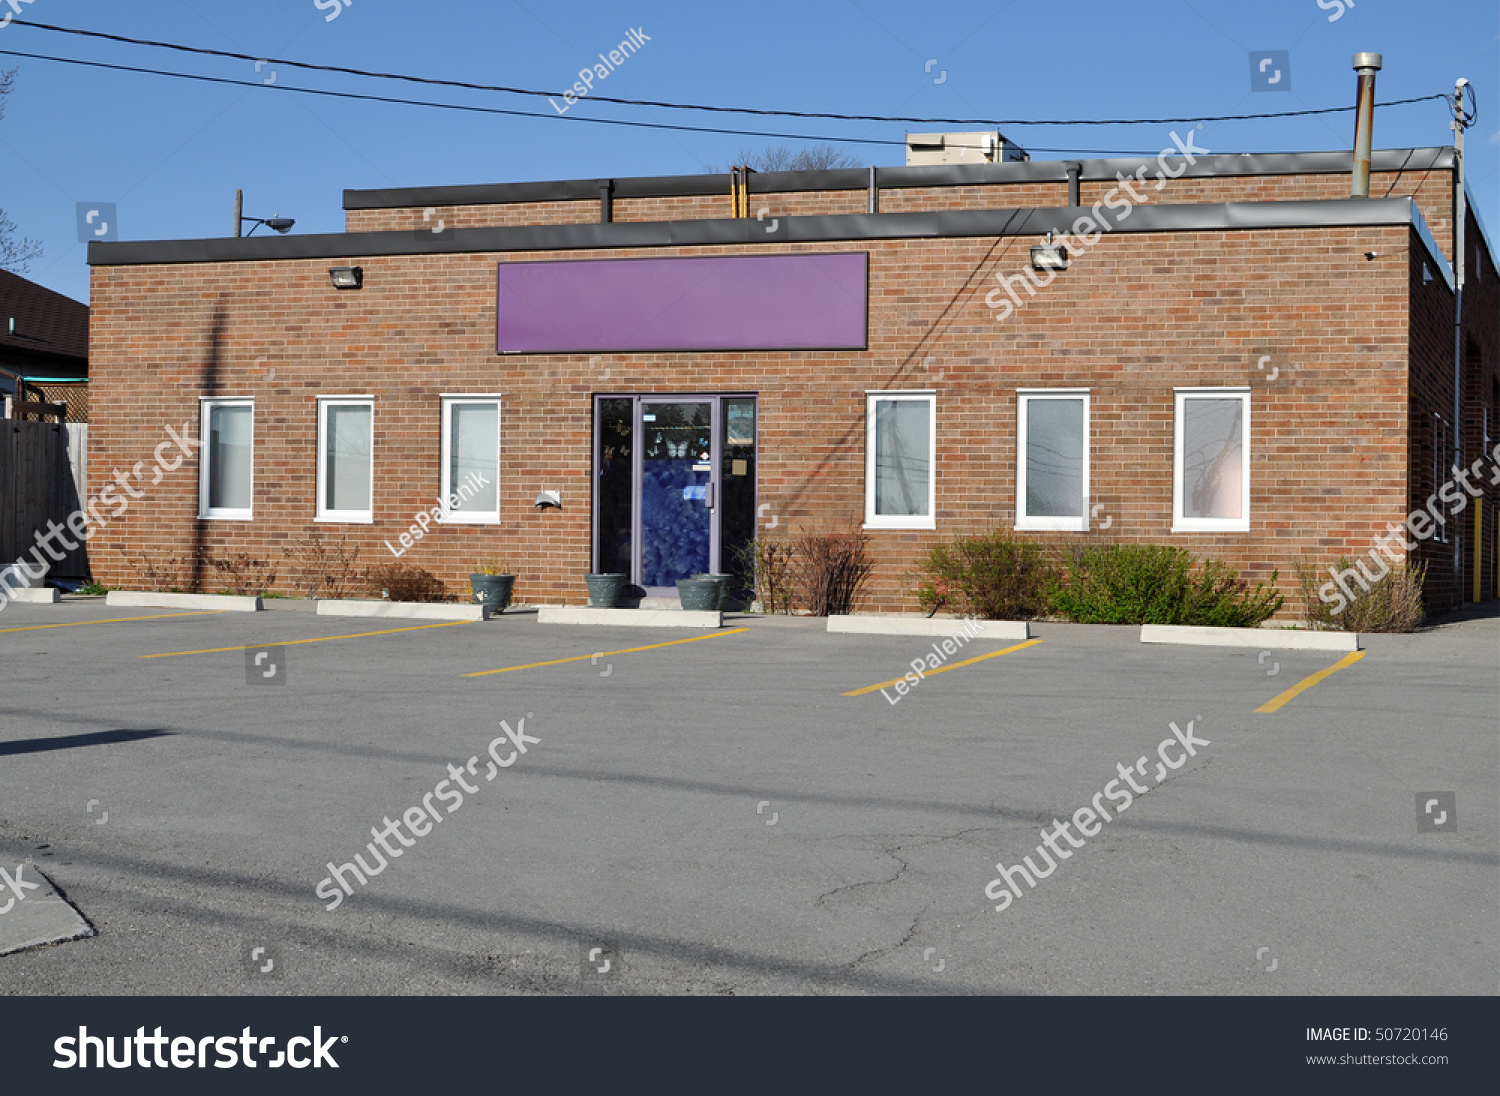 Small Commercial Building / School / Daycare Center Stock Photo ...